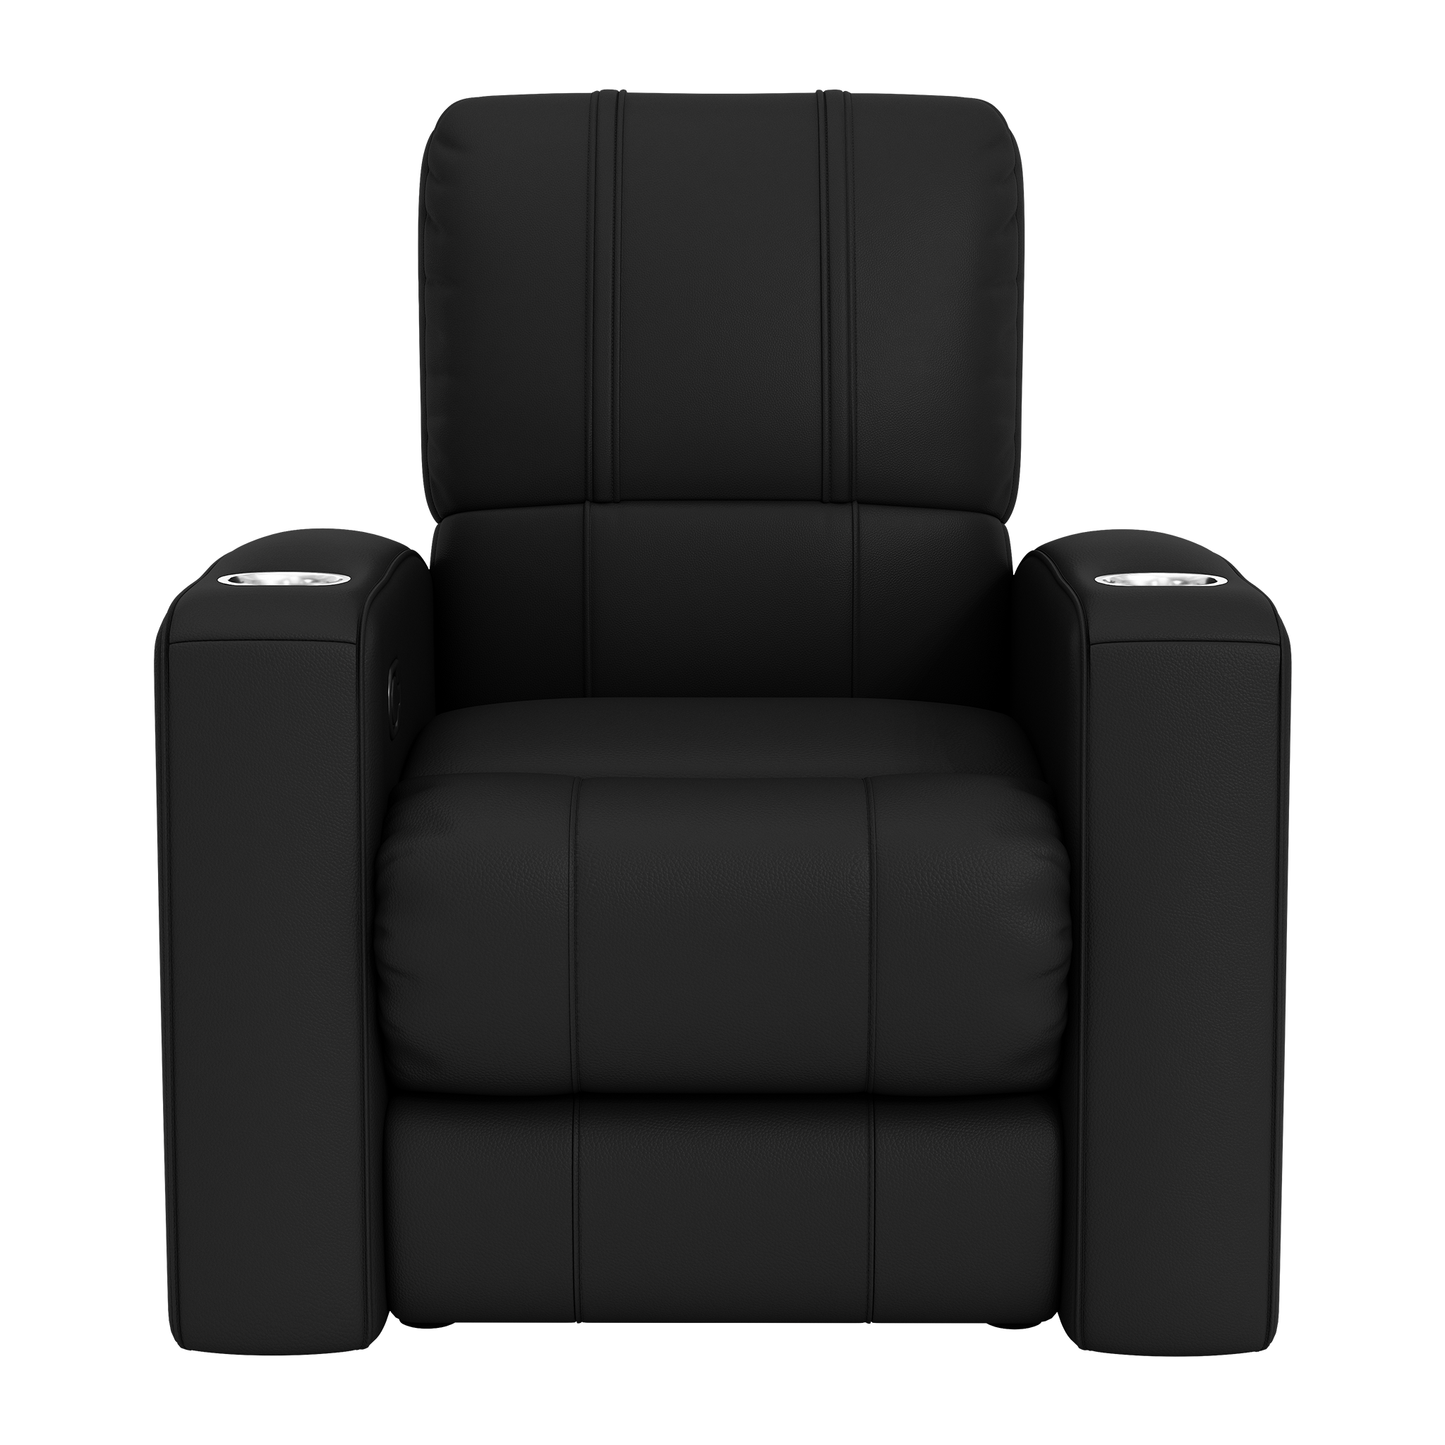 Relax Home Theater Recliner with  Tennessee Titans Secondary Logo